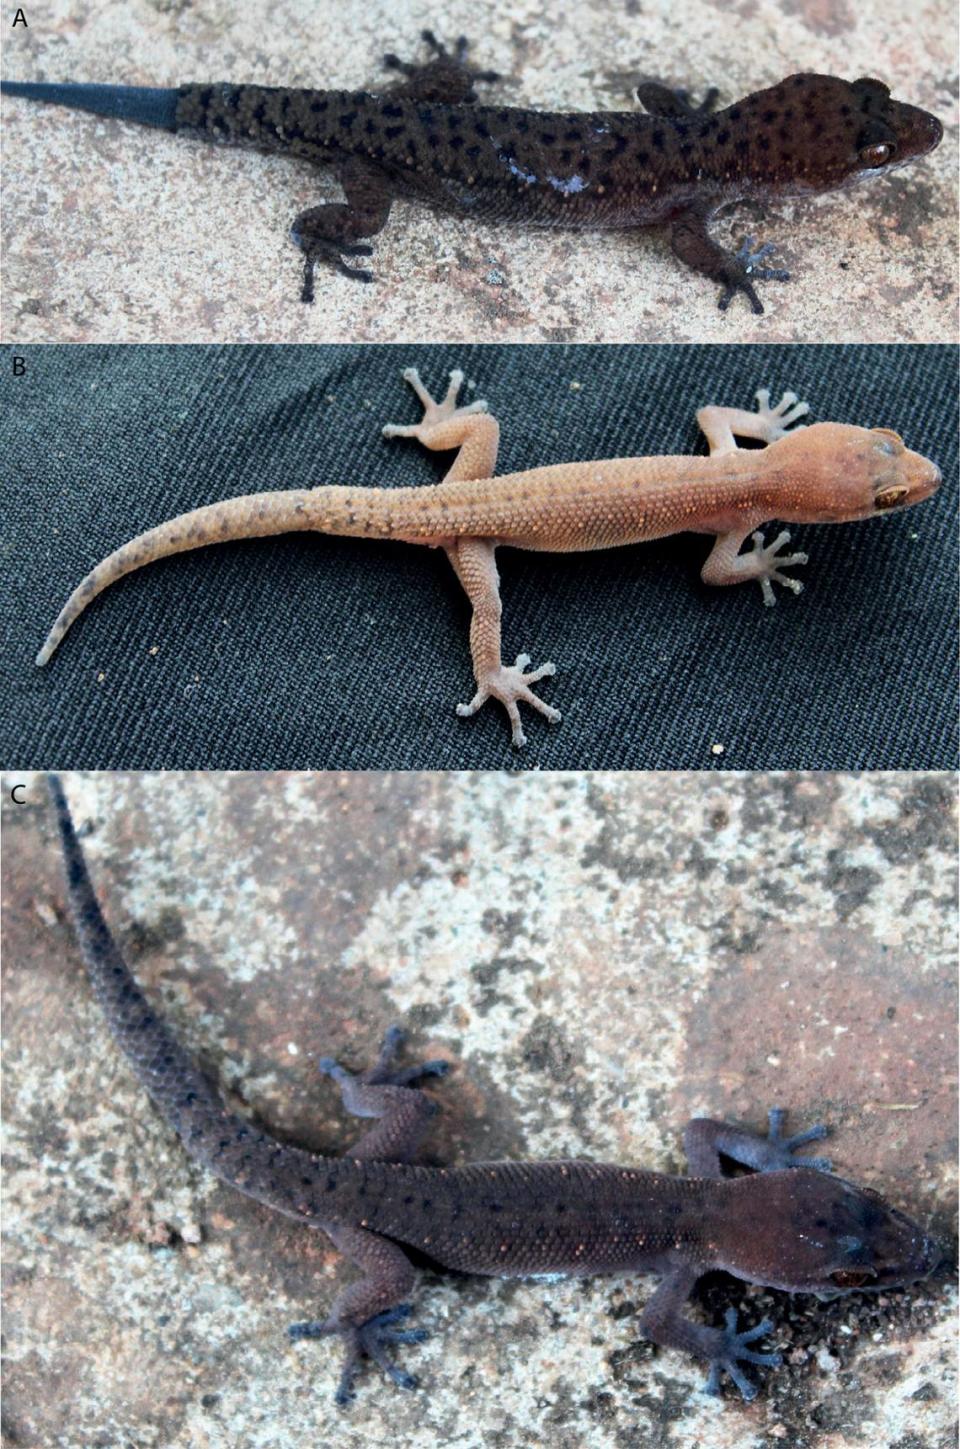 Three specimens of Muangfuang leaf-toed gecko or Dixonius muangfuangensis. From top to bottom, the geckos are an adult male, adult female and juvenile male. Photos from Vinh Quang Luu, Thuong Huyen Nguyen, Minh Duc Le, Jesse L. Grismer, Hong Bich Ha, Saly Sitthivong, Tuoi Thi Hoang and L. Lee Grismer